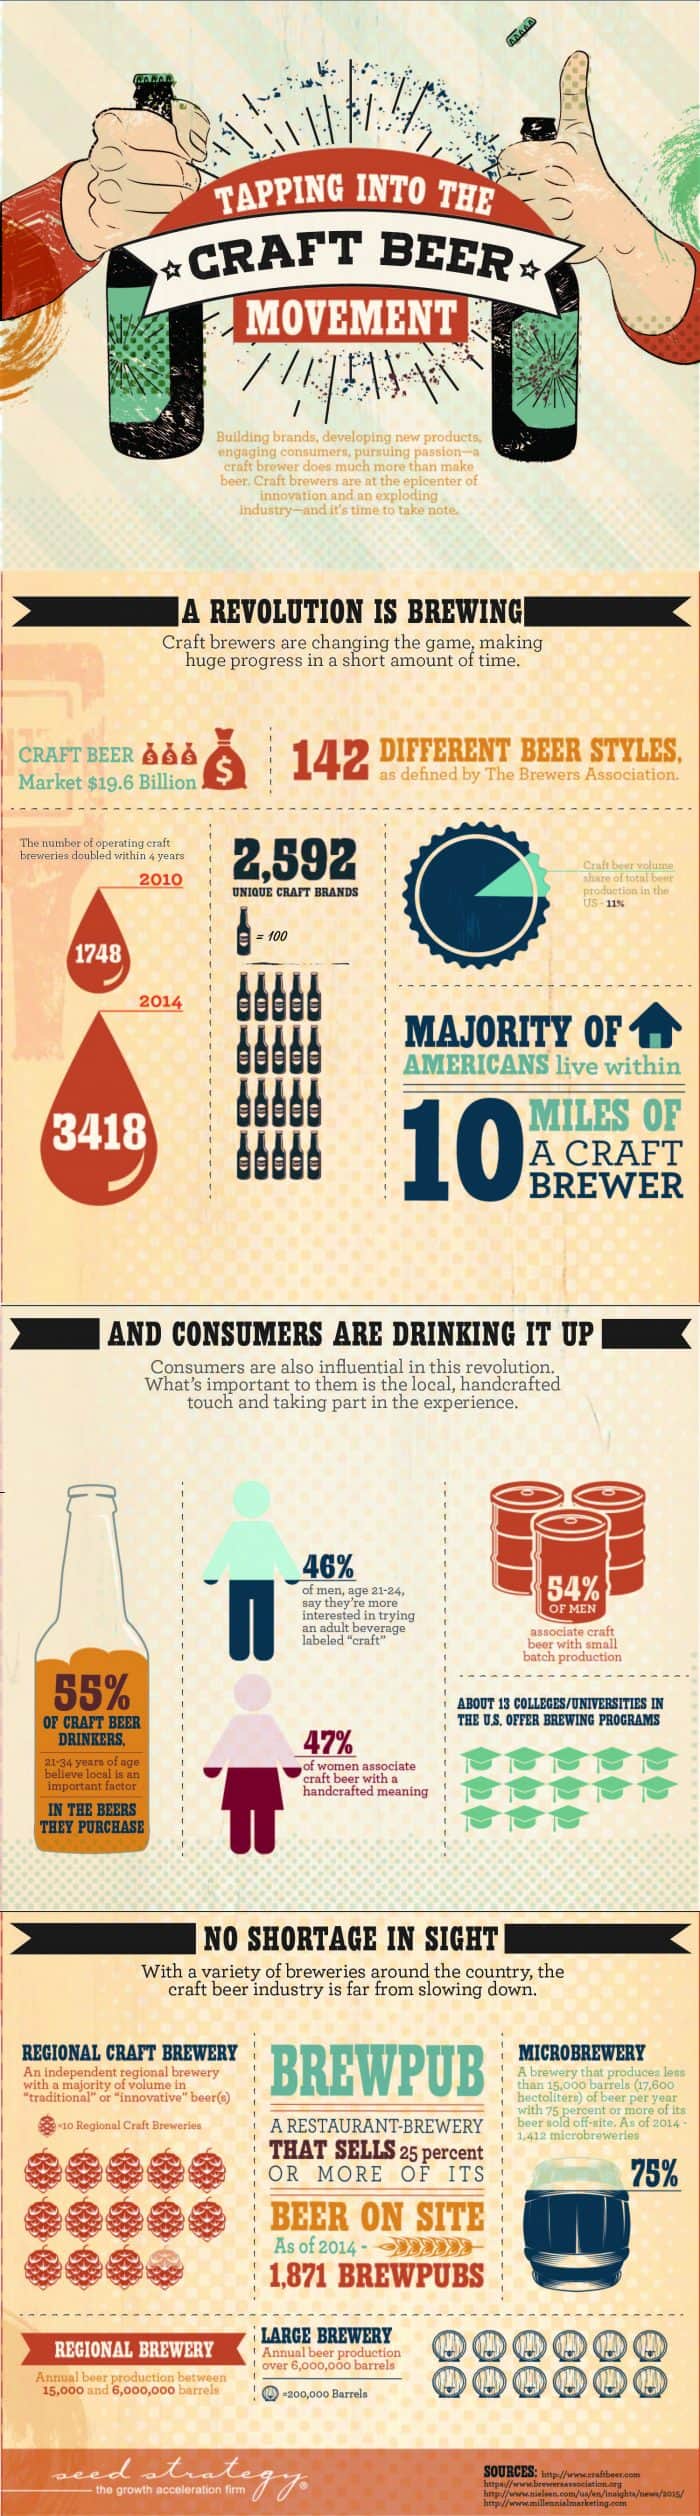 Tapping Into The Craft Beer Movement Infographic